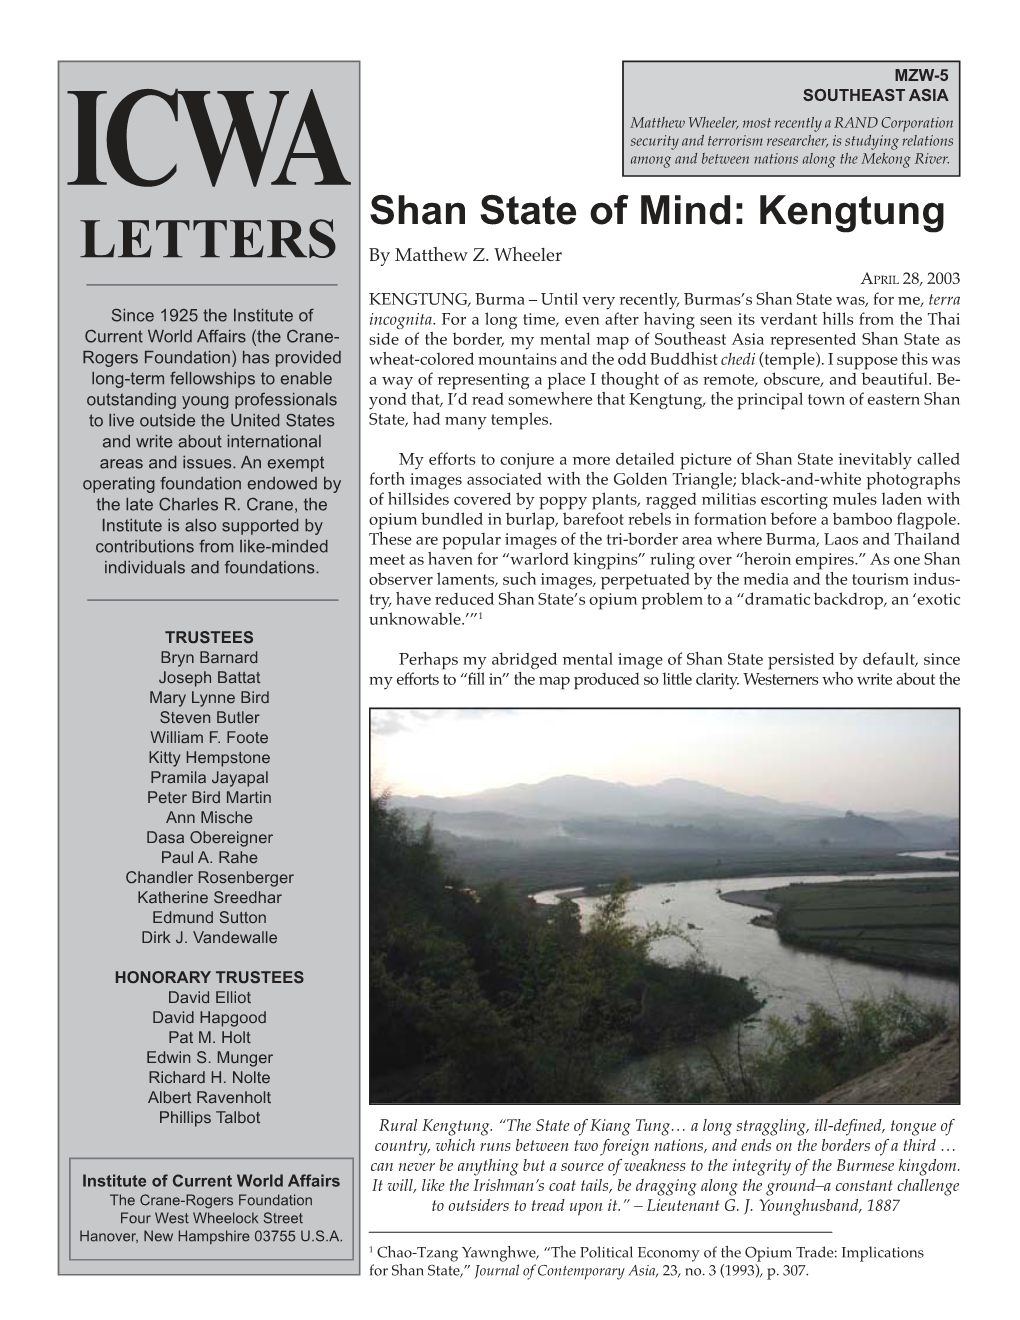 Kengtung LETTERS by Matthew Z